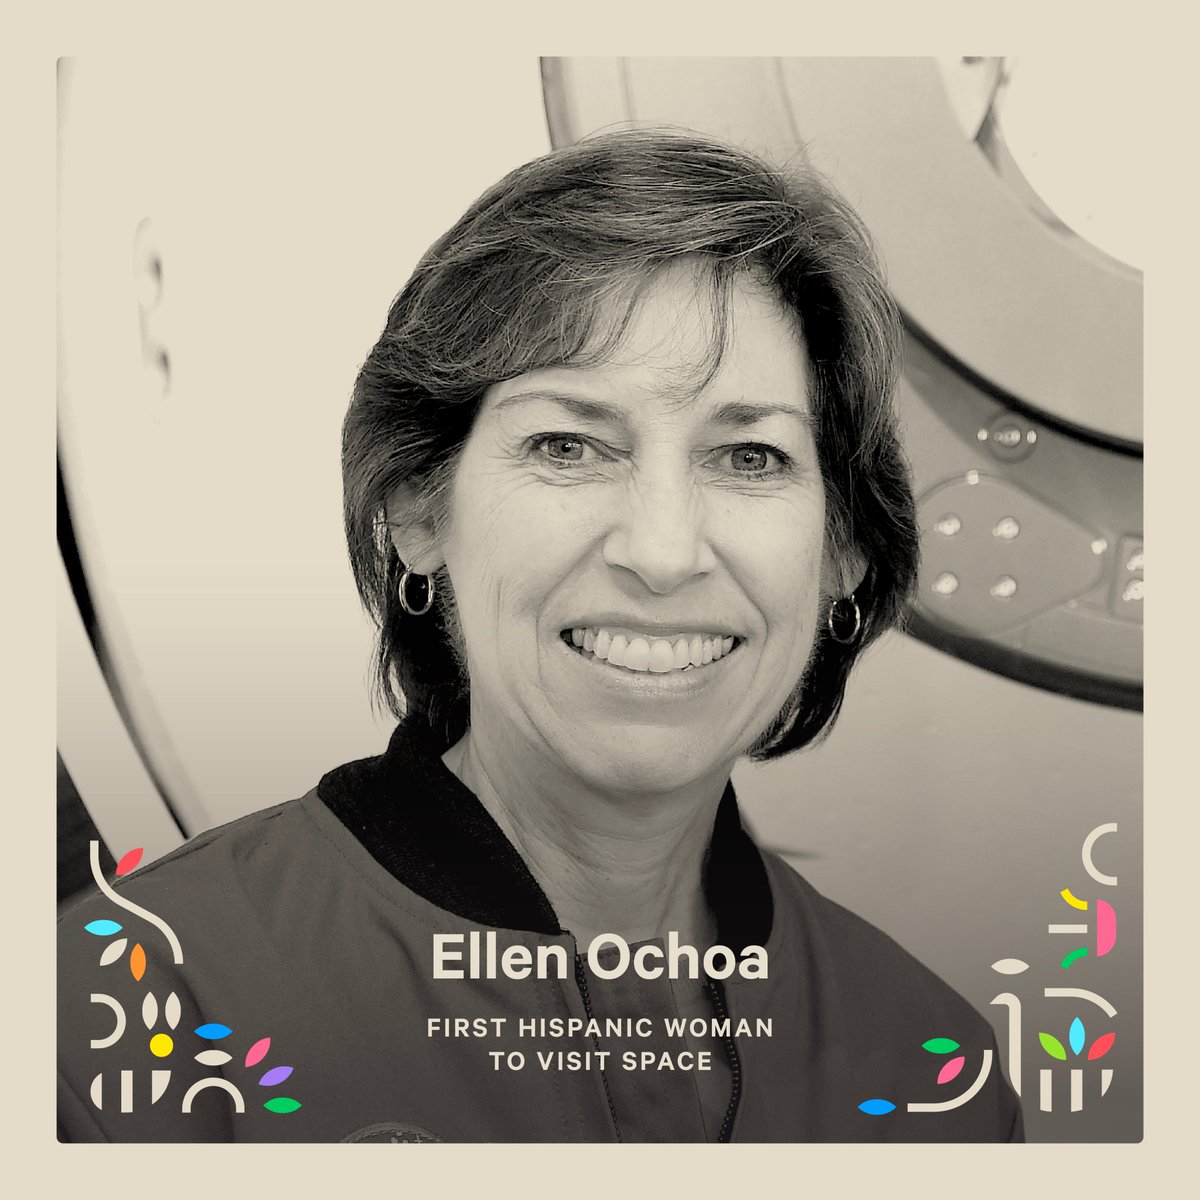 Ellen Ochoa is an icon for Latinx women in STEM. An engineer, astronaut, and former director of the Johnson Space Center, Ochoa made history in 1993 when she became the first Hispanic woman to travel to space while aboard the space shuttle Discovery.